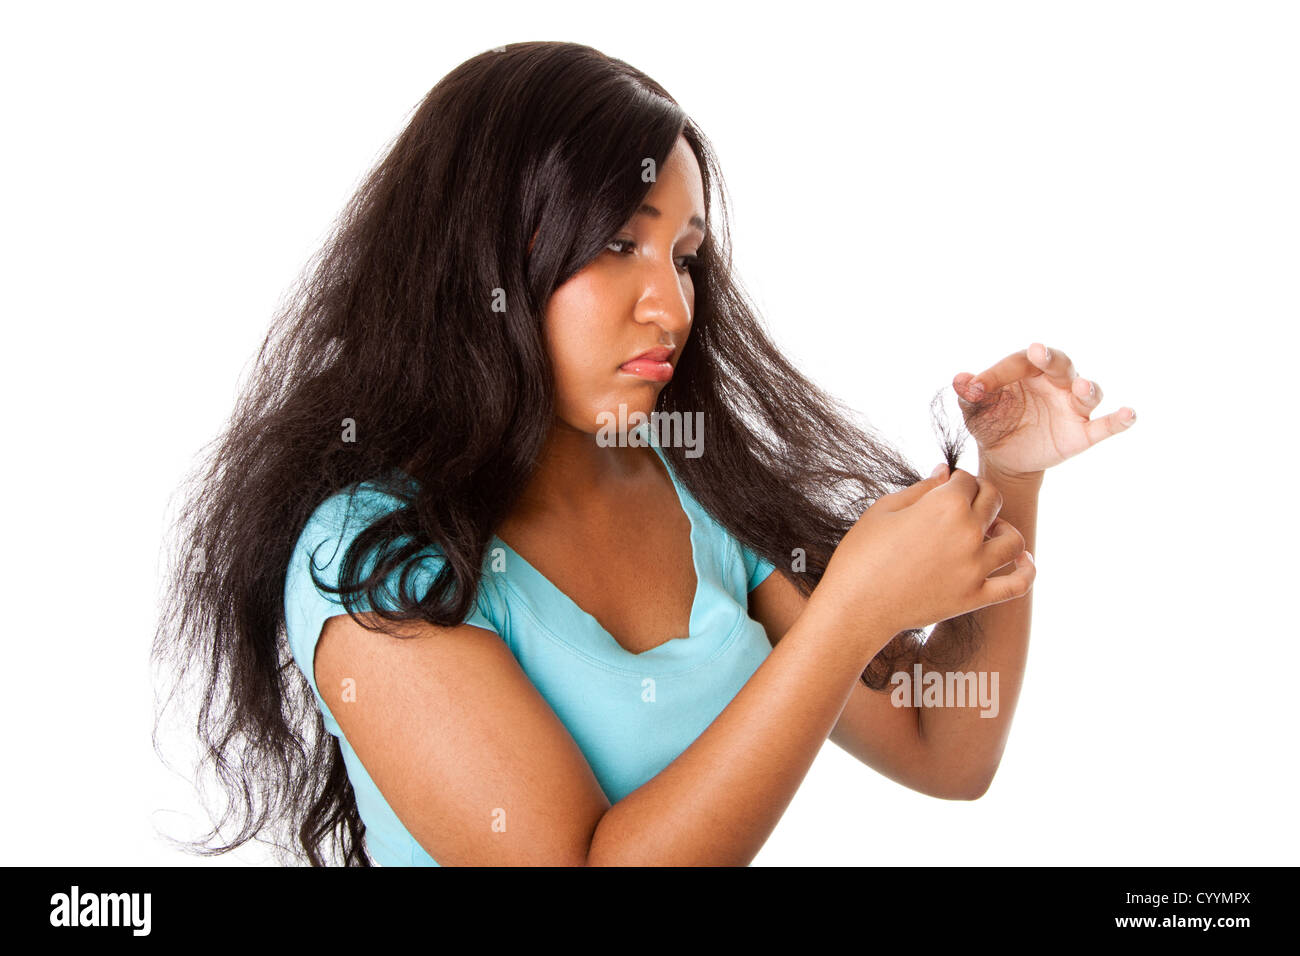 Teenage girl sad about her frizzy hair with split hair tips due to bad haircare, isolated. Stock Photo